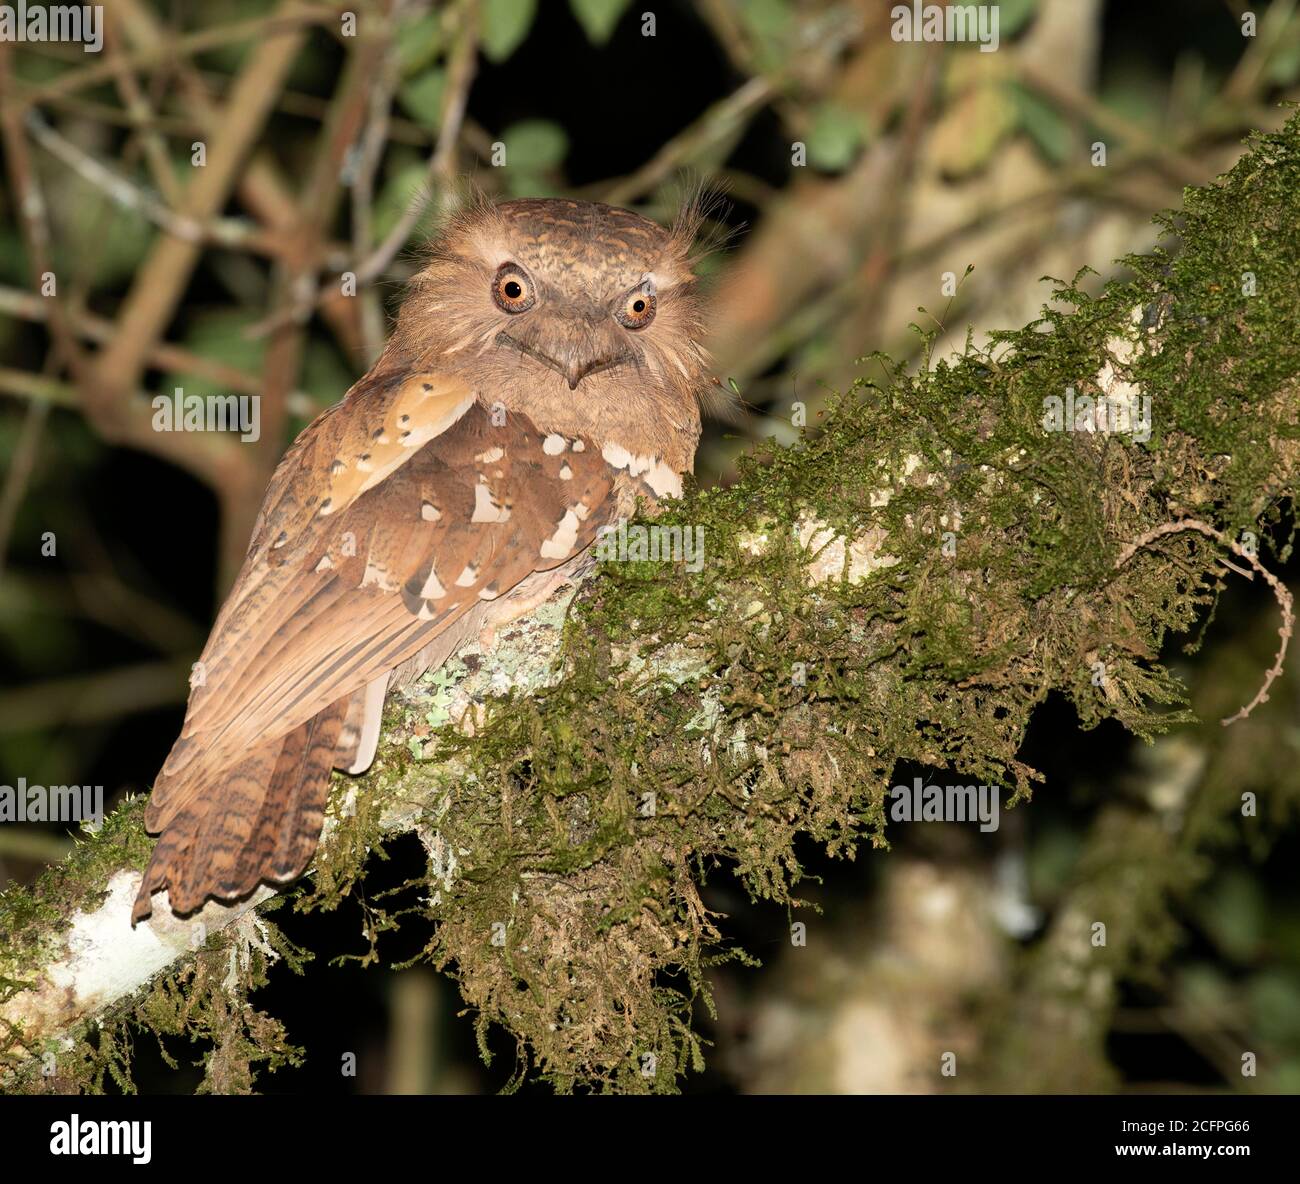 Philippine frogmouth (Batrachostomus septimus), perched on a moss covered branch, Philippines Stock Photo